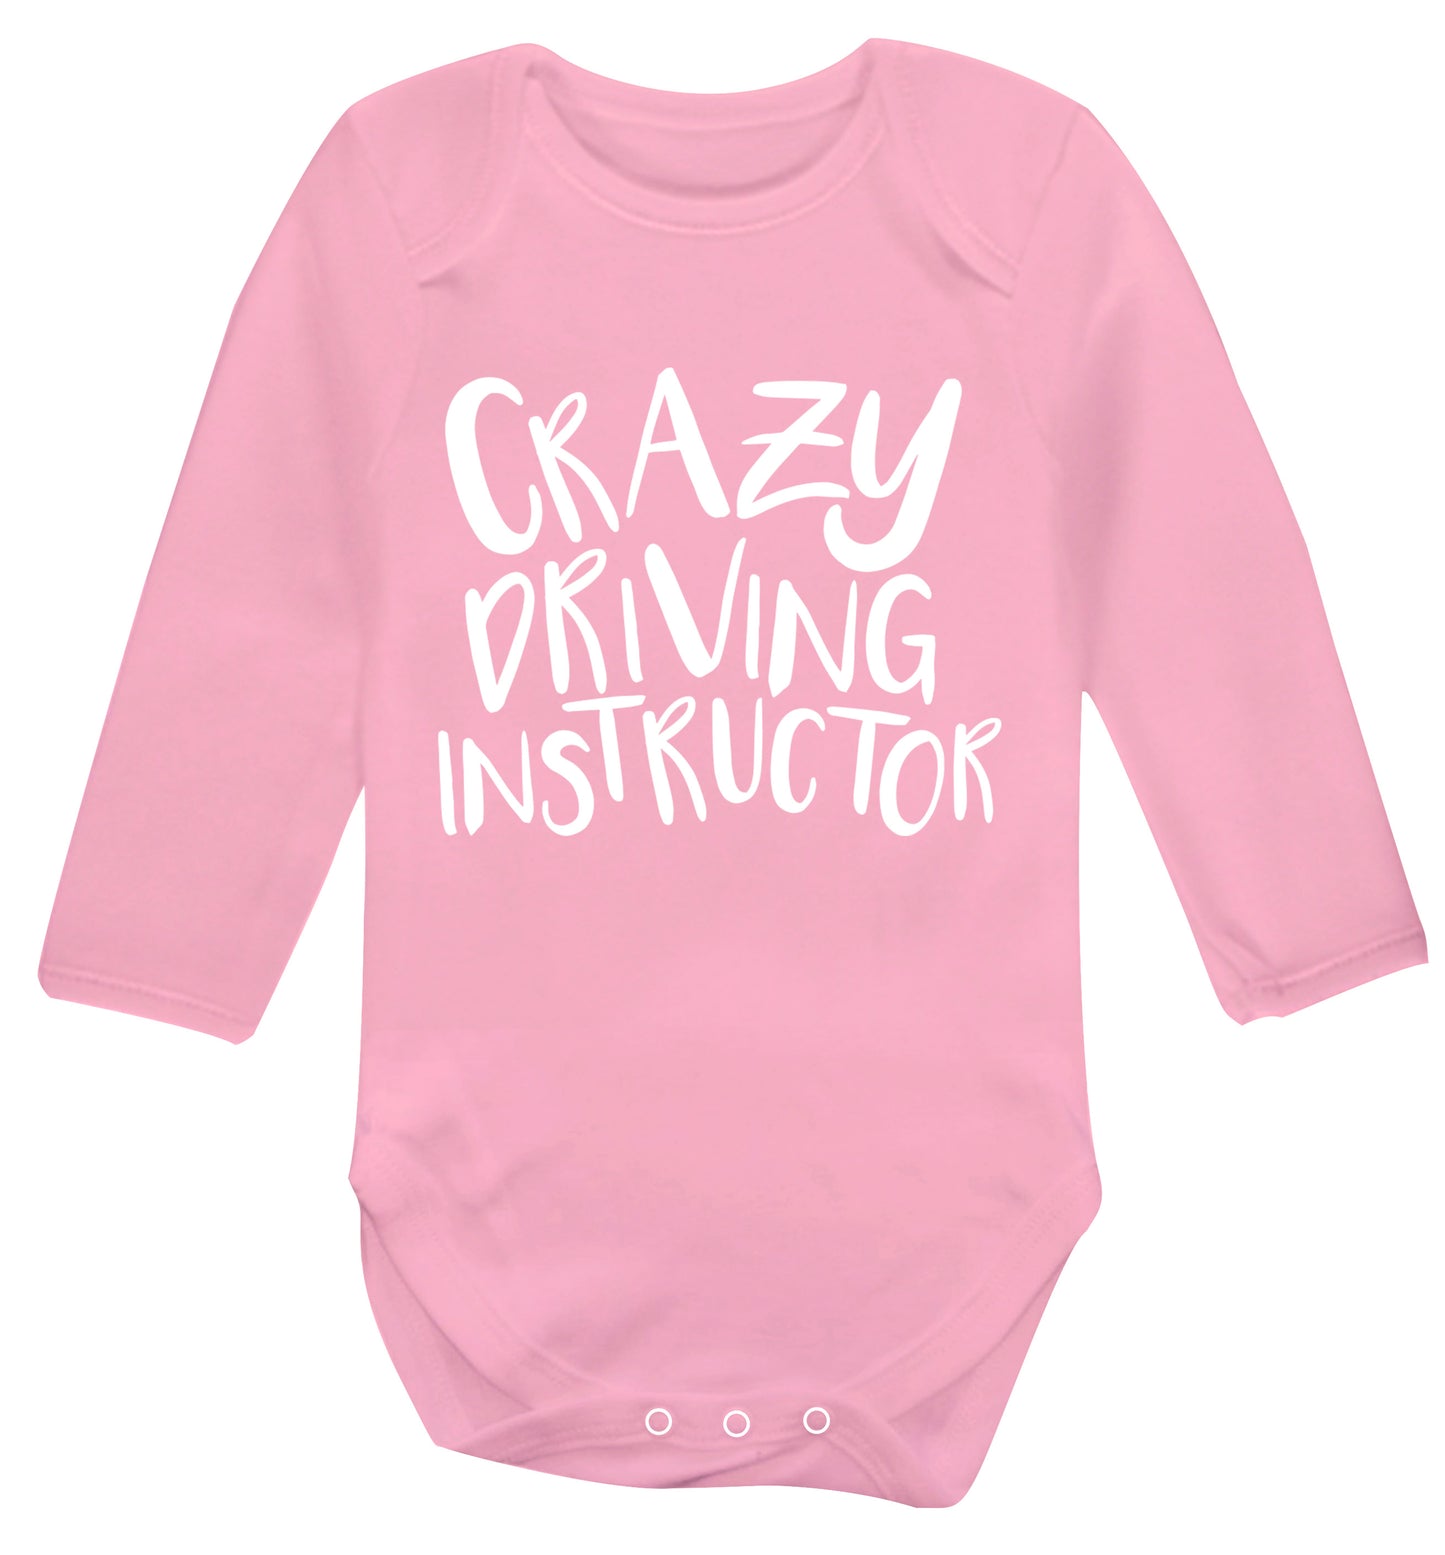 Crazy driving instructor Baby Vest long sleeved pale pink 6-12 months